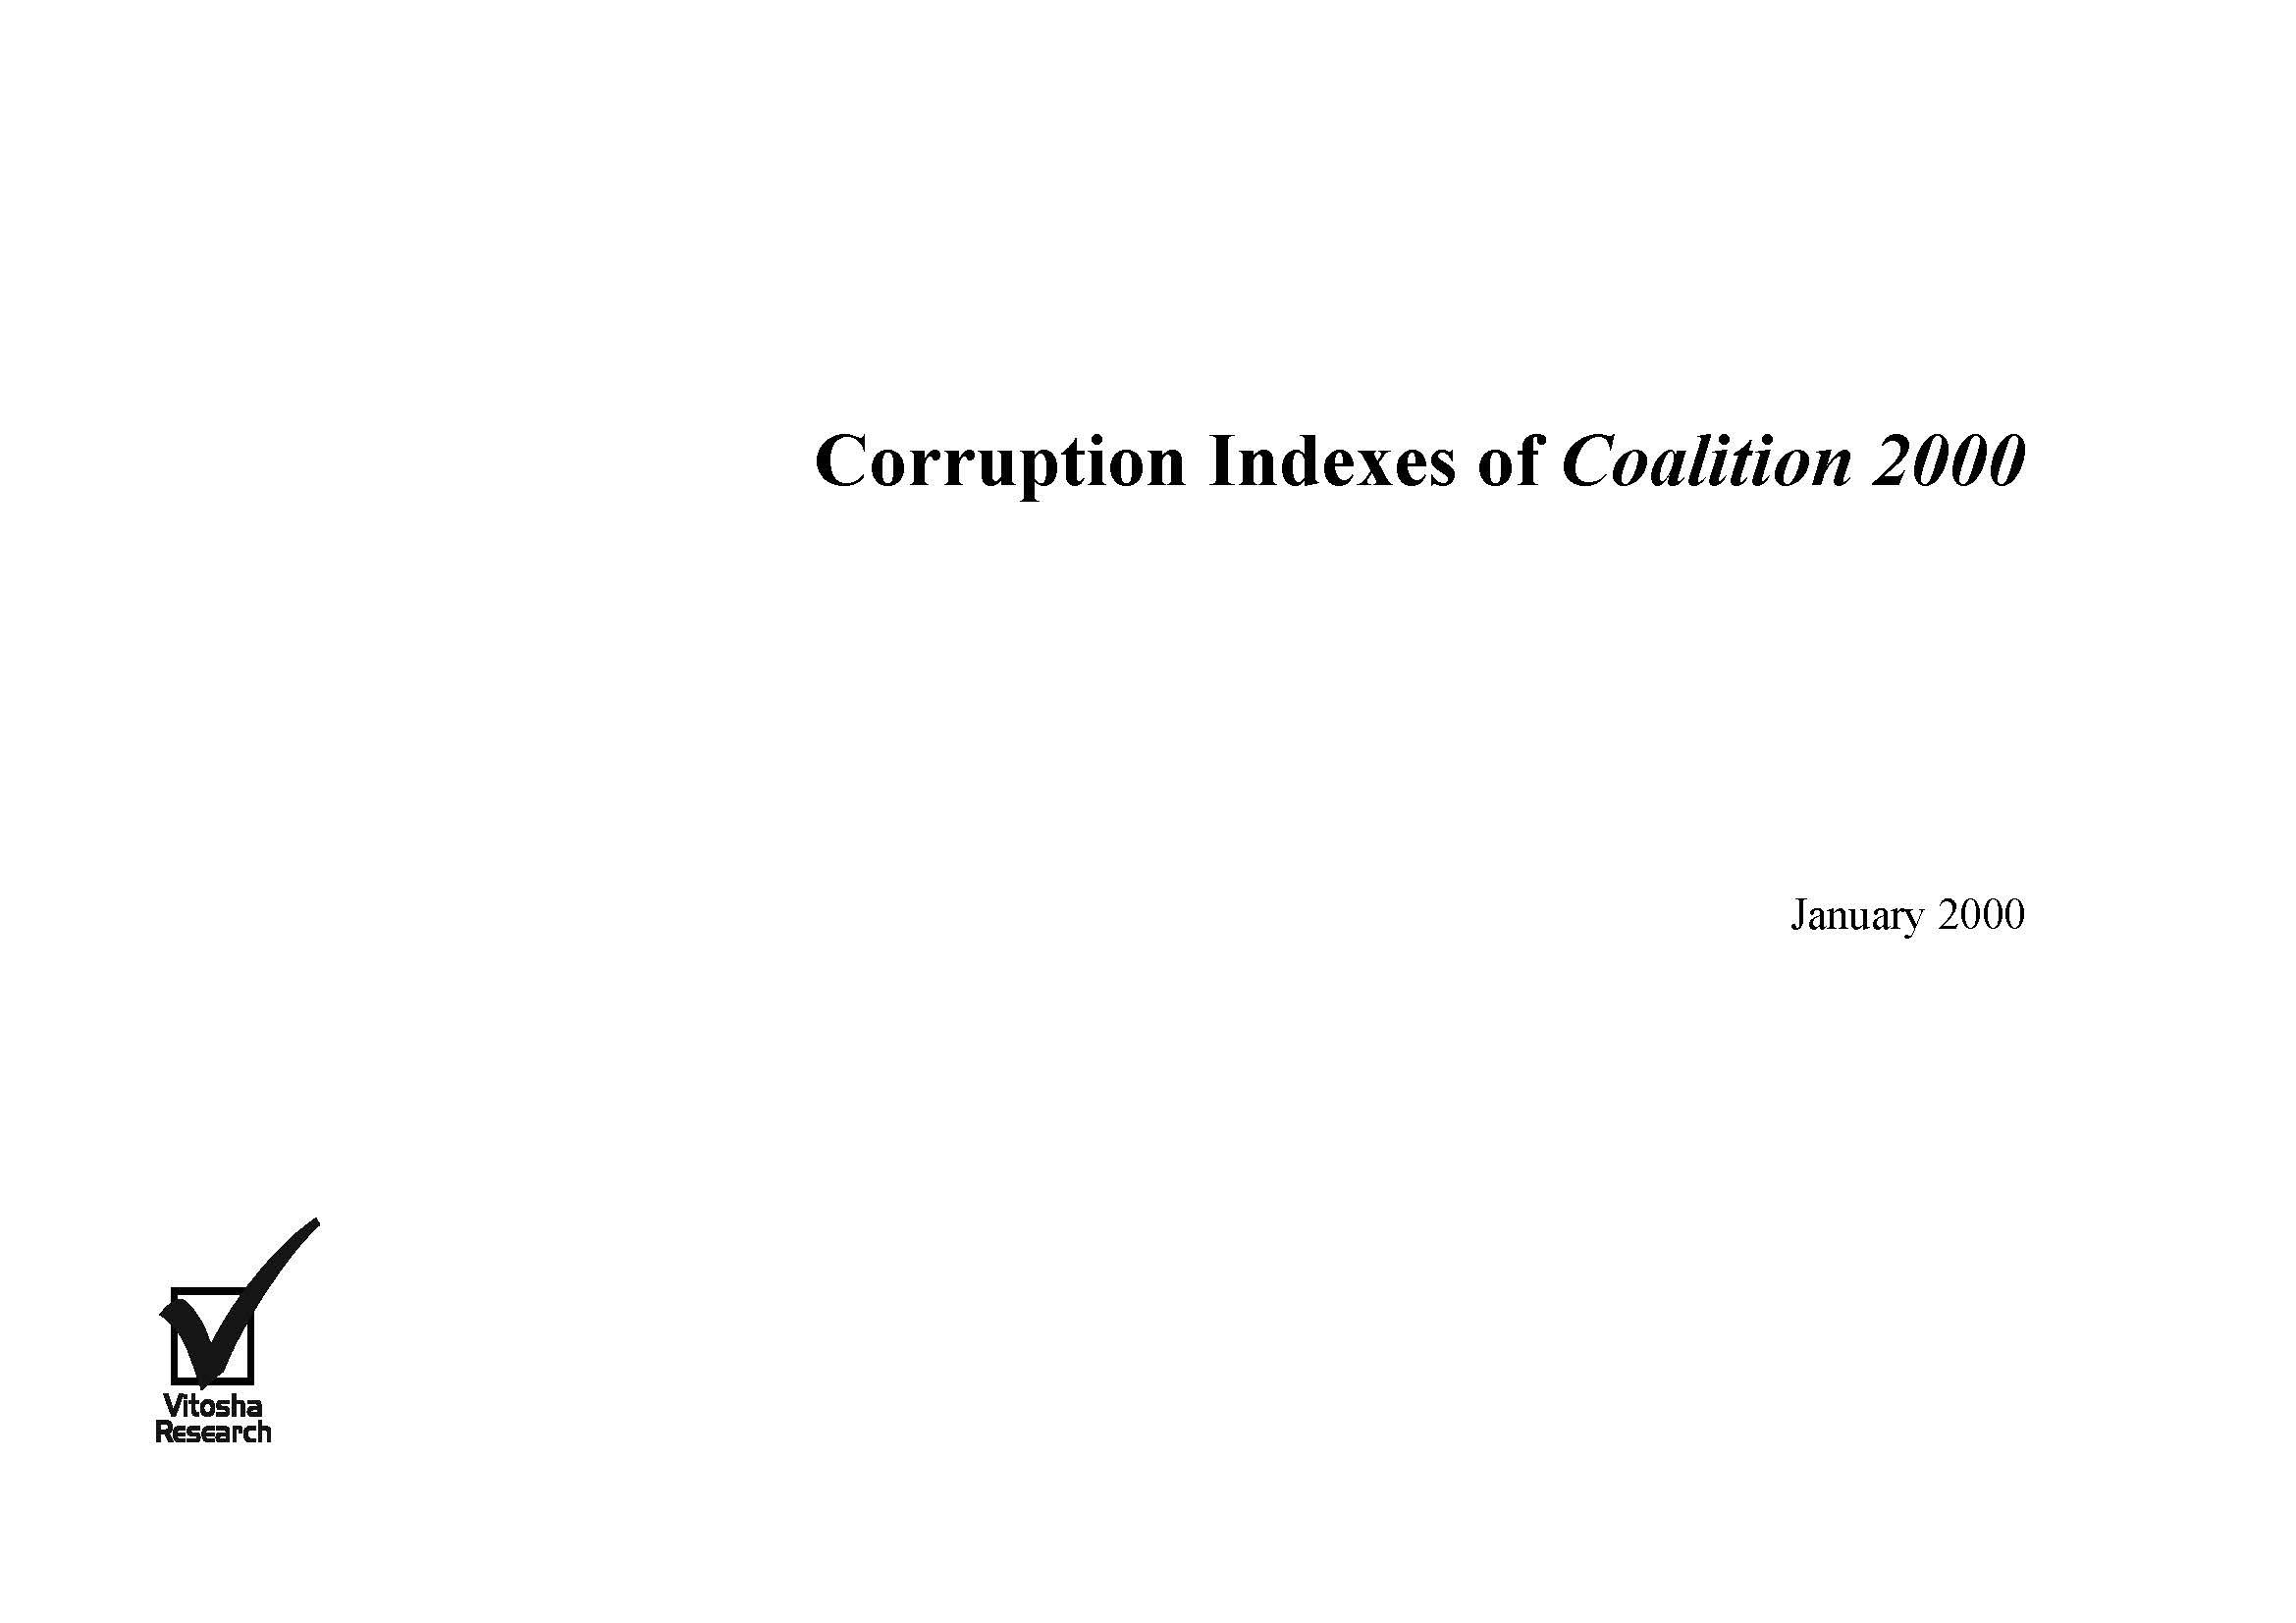 Corruption Indexes of Coalition 2000, January 2000